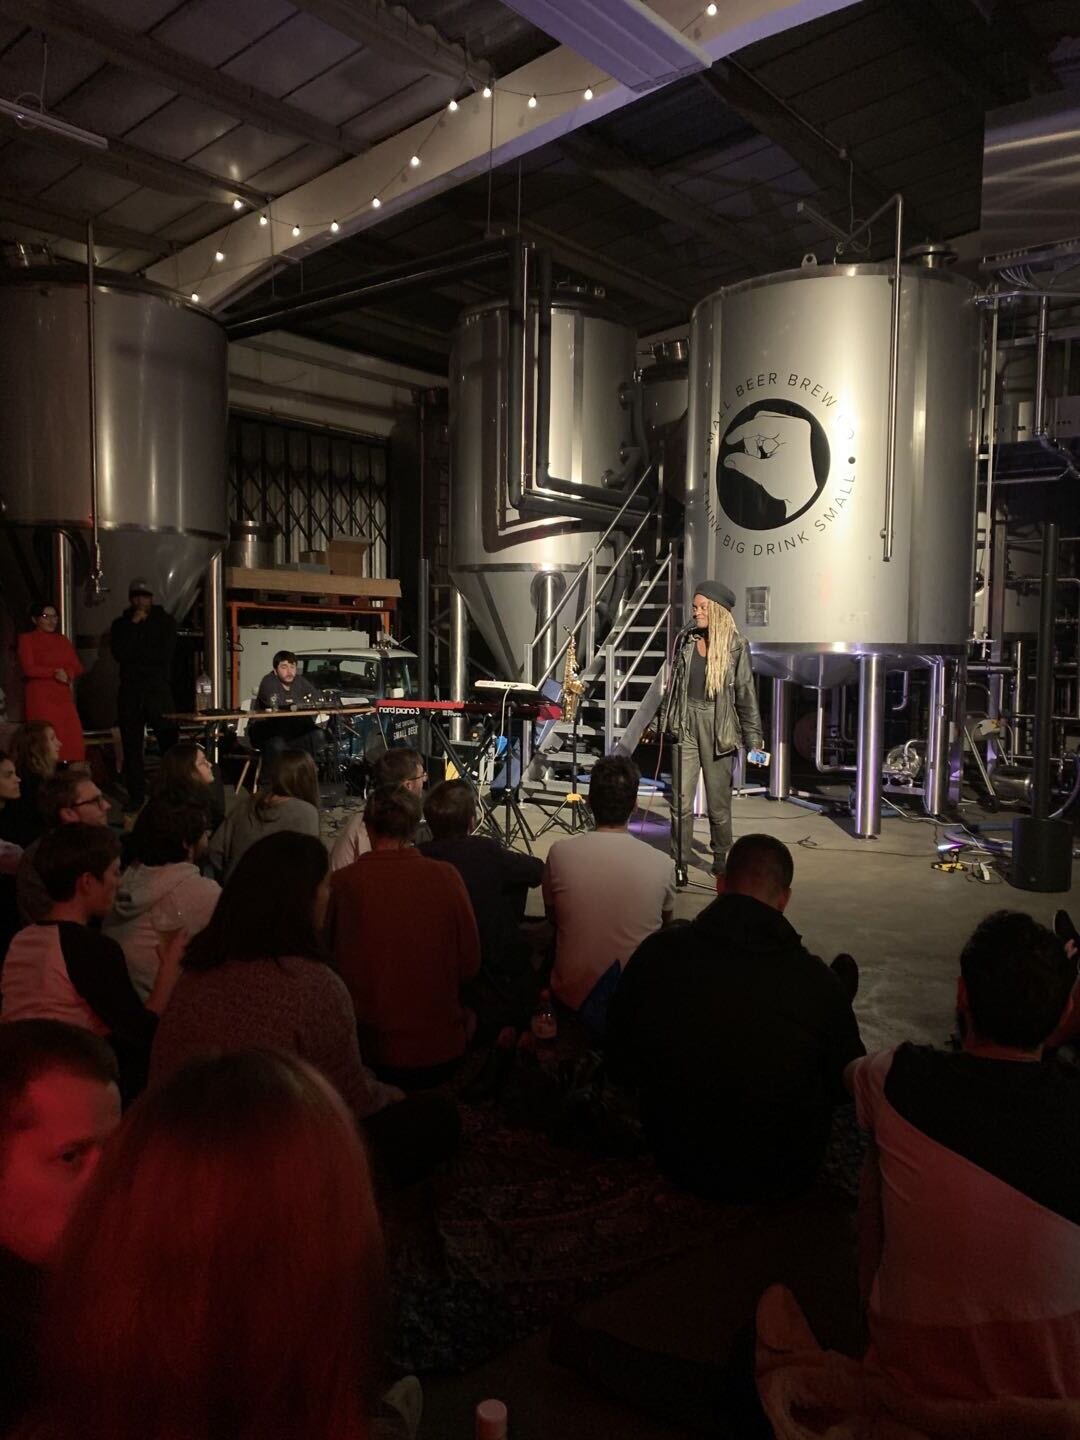 sofar sounds small beer brewery2.jpeg